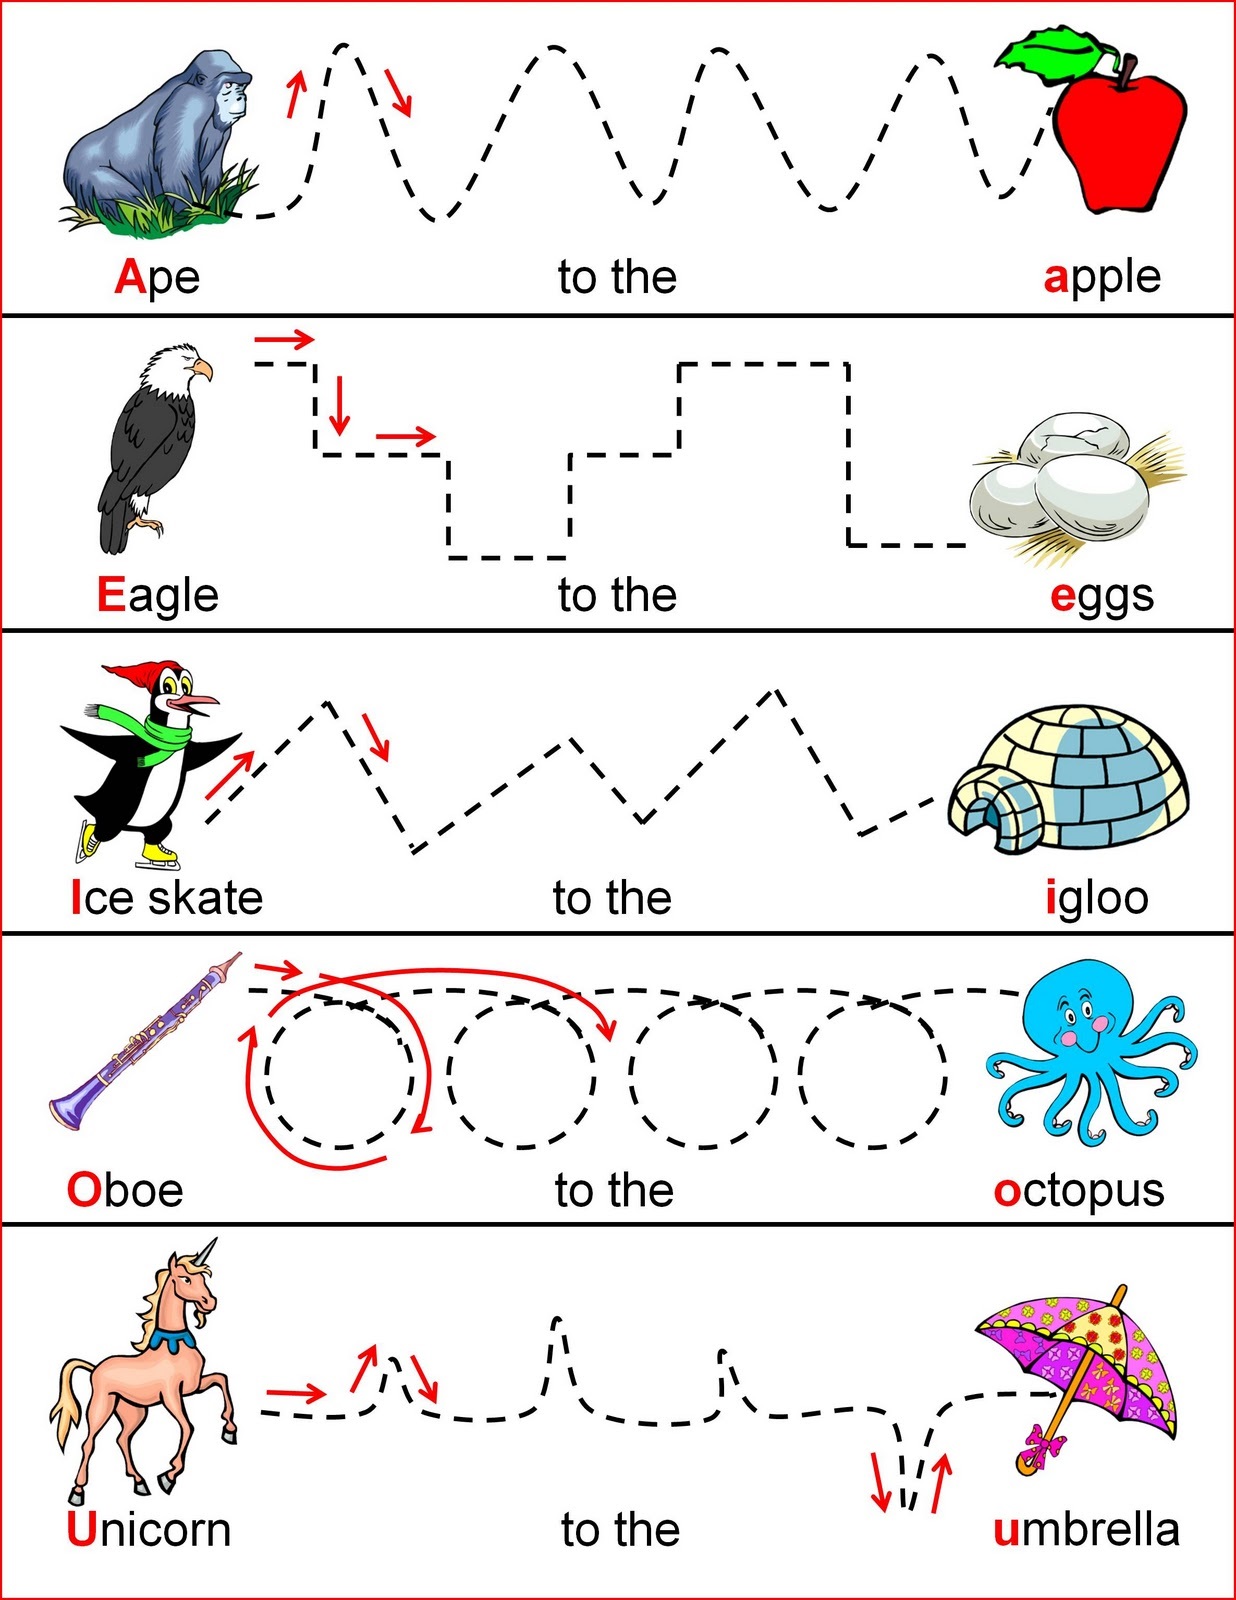 3 year old learning activities pdf